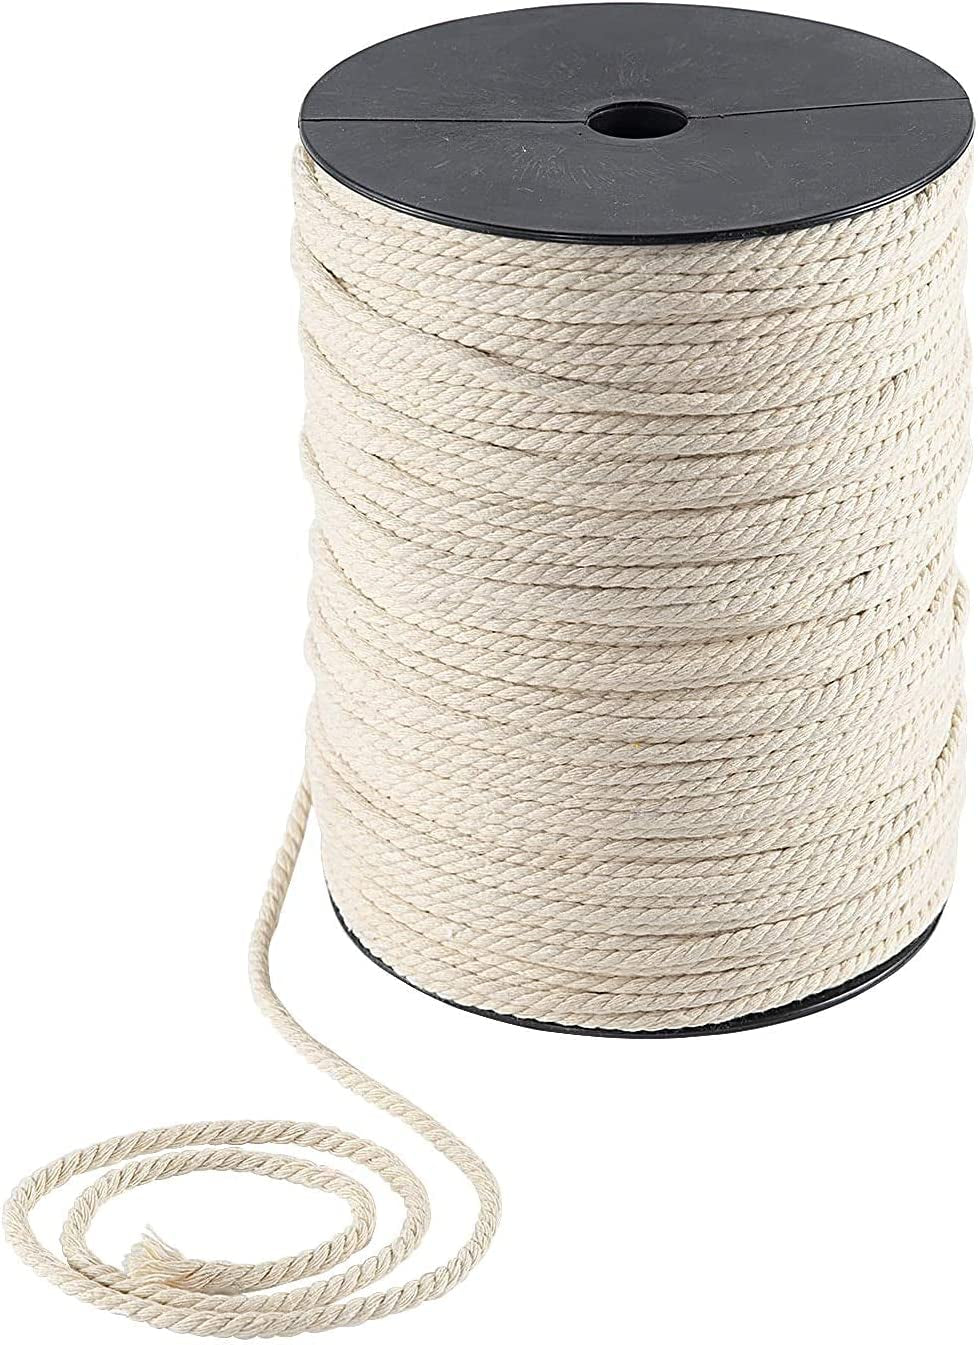 CNZON, Macrame Cord 4Mm Thick Cotton Twine 656 Feet, Natural Cotton Macrame Rope Cotton Cord for Wall Hanging, Plant Hangers, Crafts, Knitting,Home Decoration